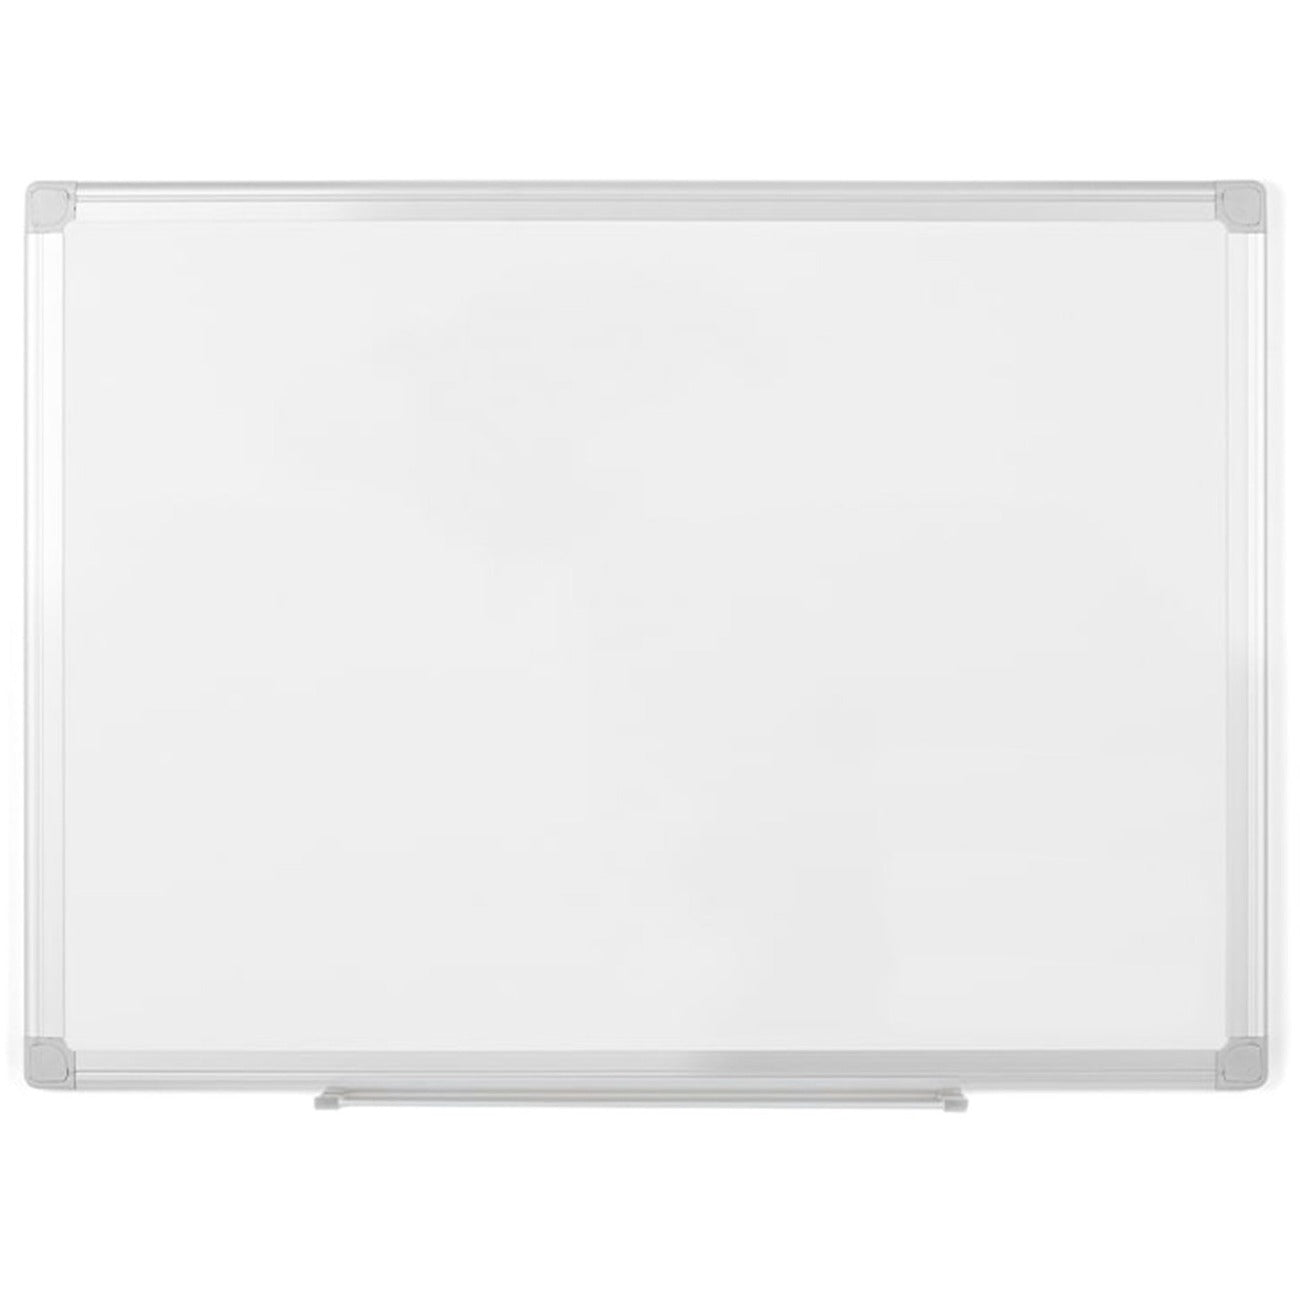 Double-SIded Dry Erase Whiteboard